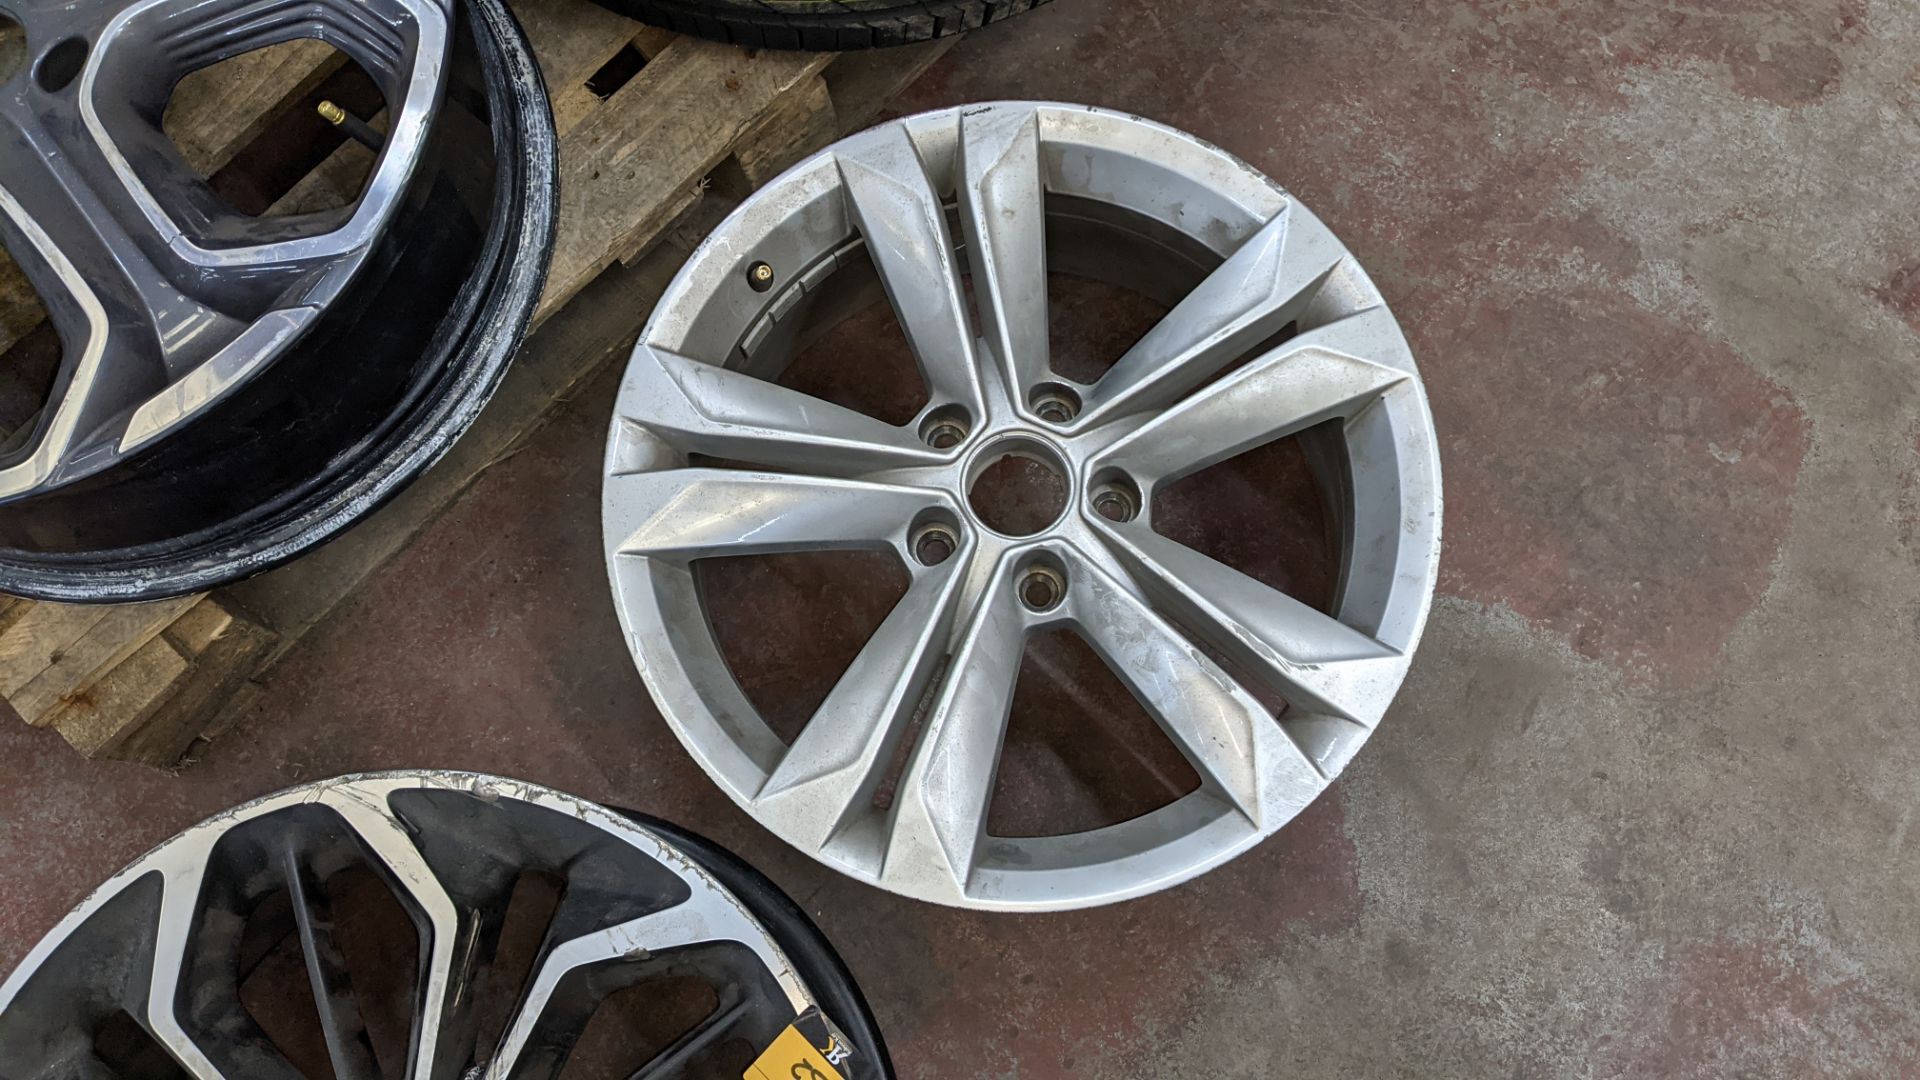 5 off assorted alloy wheels - Image 9 of 9